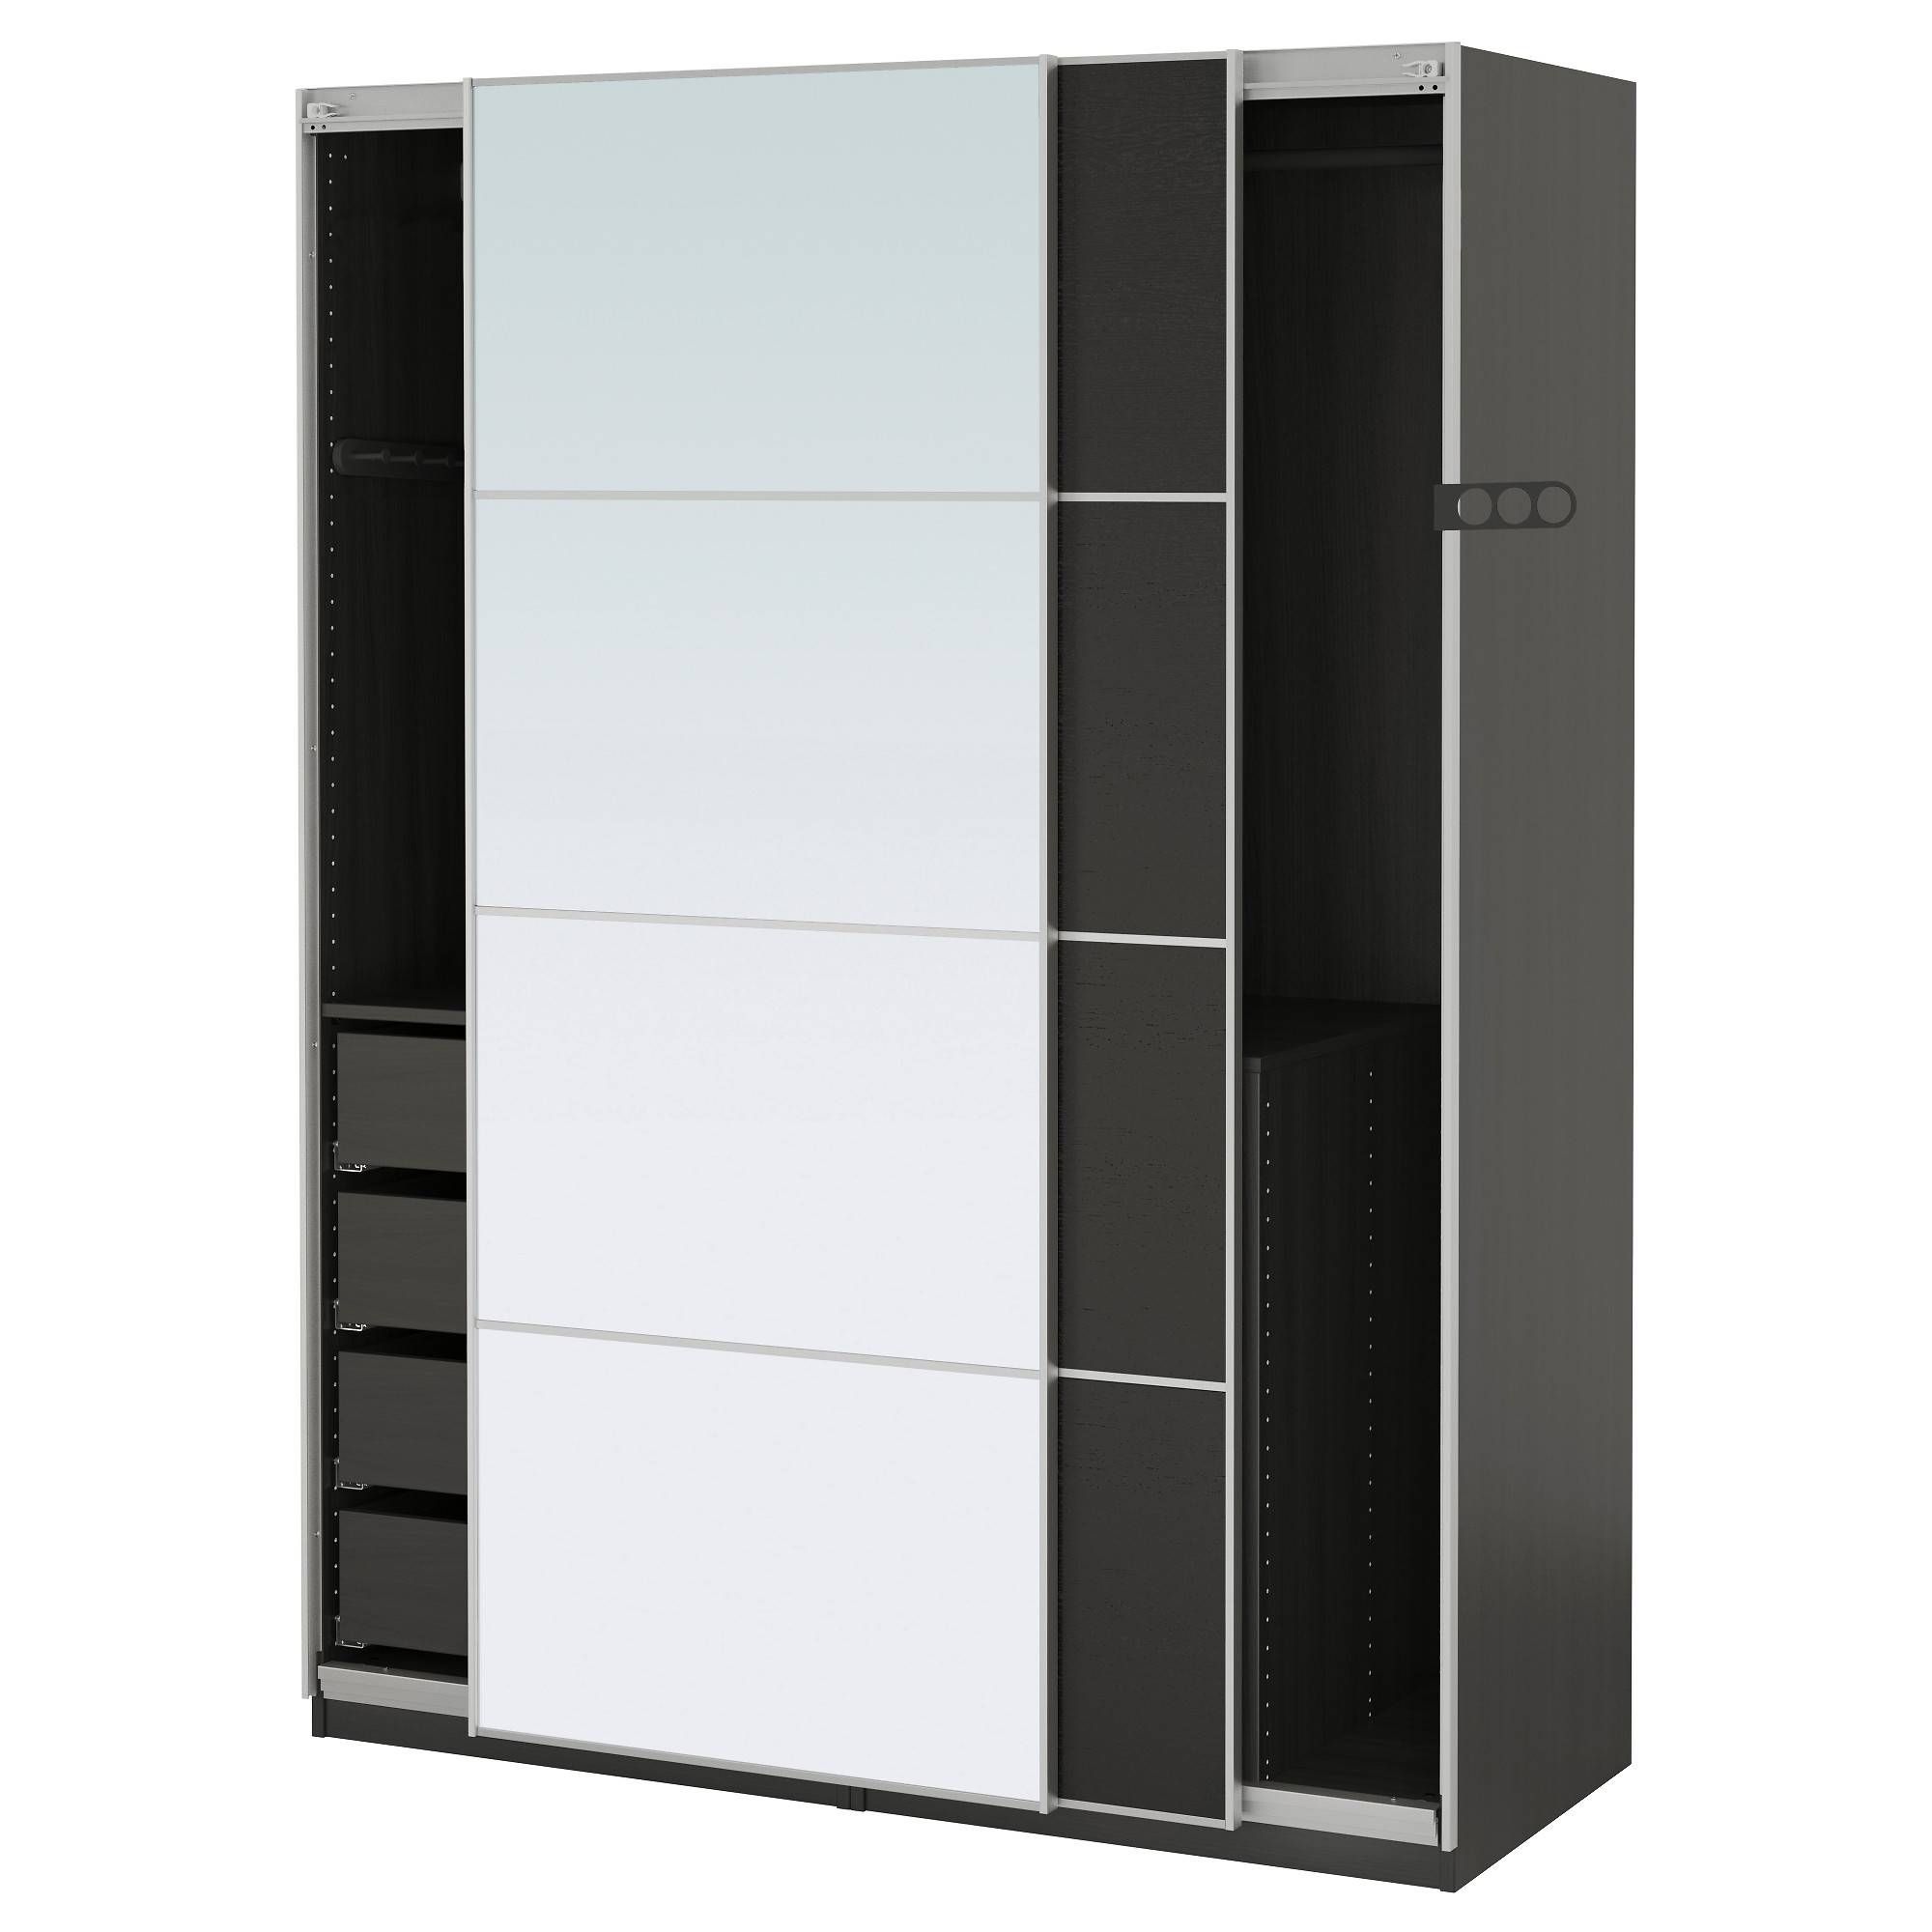 Wardrobes – Pax System – Ikea Intended For Single Wardrobe With Drawers And Shelves (View 10 of 30)